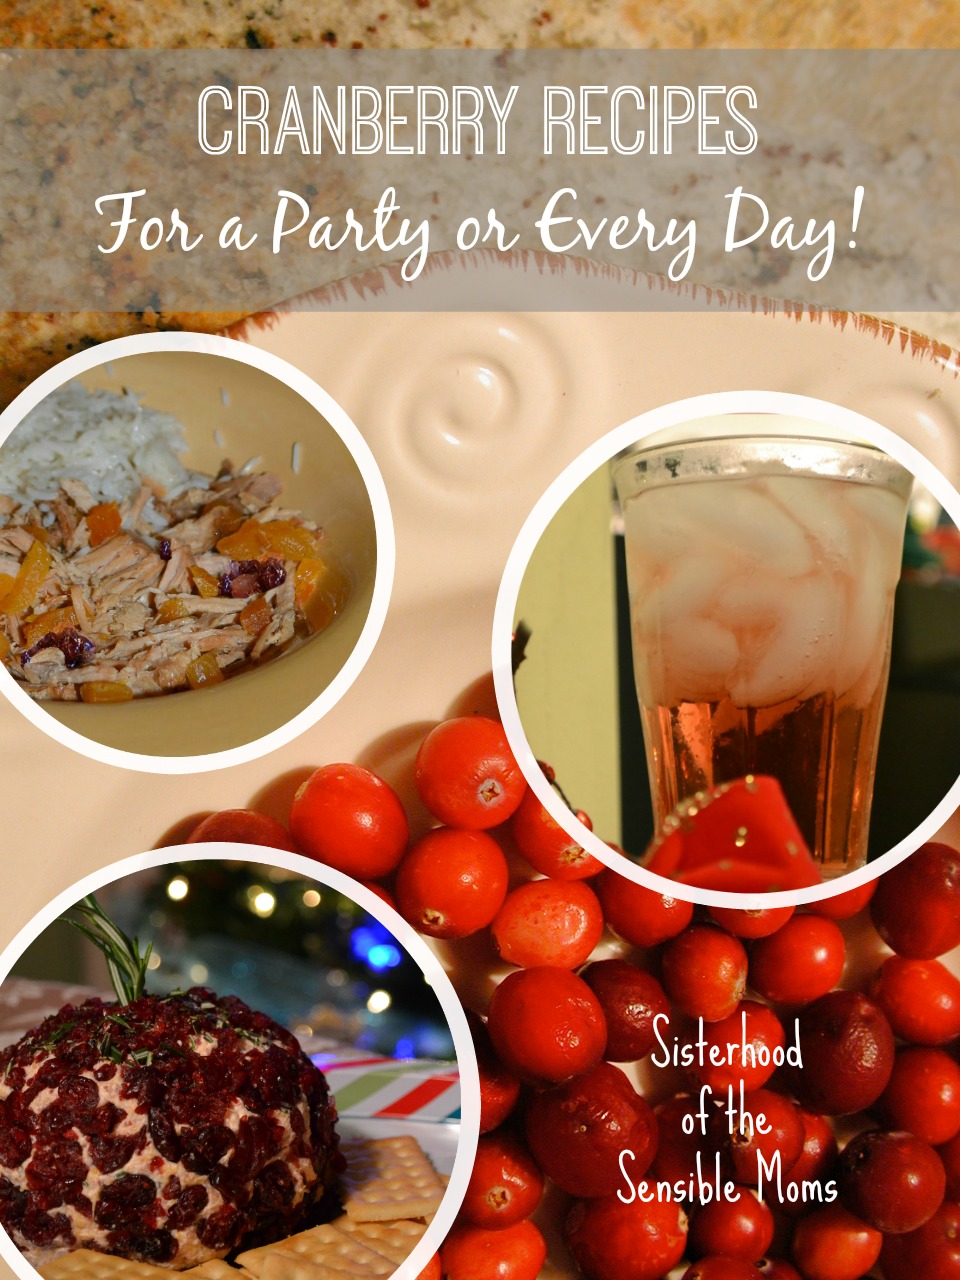 Cranberry recipes for a party or every day! Let's hear it for cranberry, that culinary trooper that is often an afterthought! Here's some cranberry recipes for drinks, appetizers, and main dishes that will bring it front and center! Sisterhood of the Sensible Moms